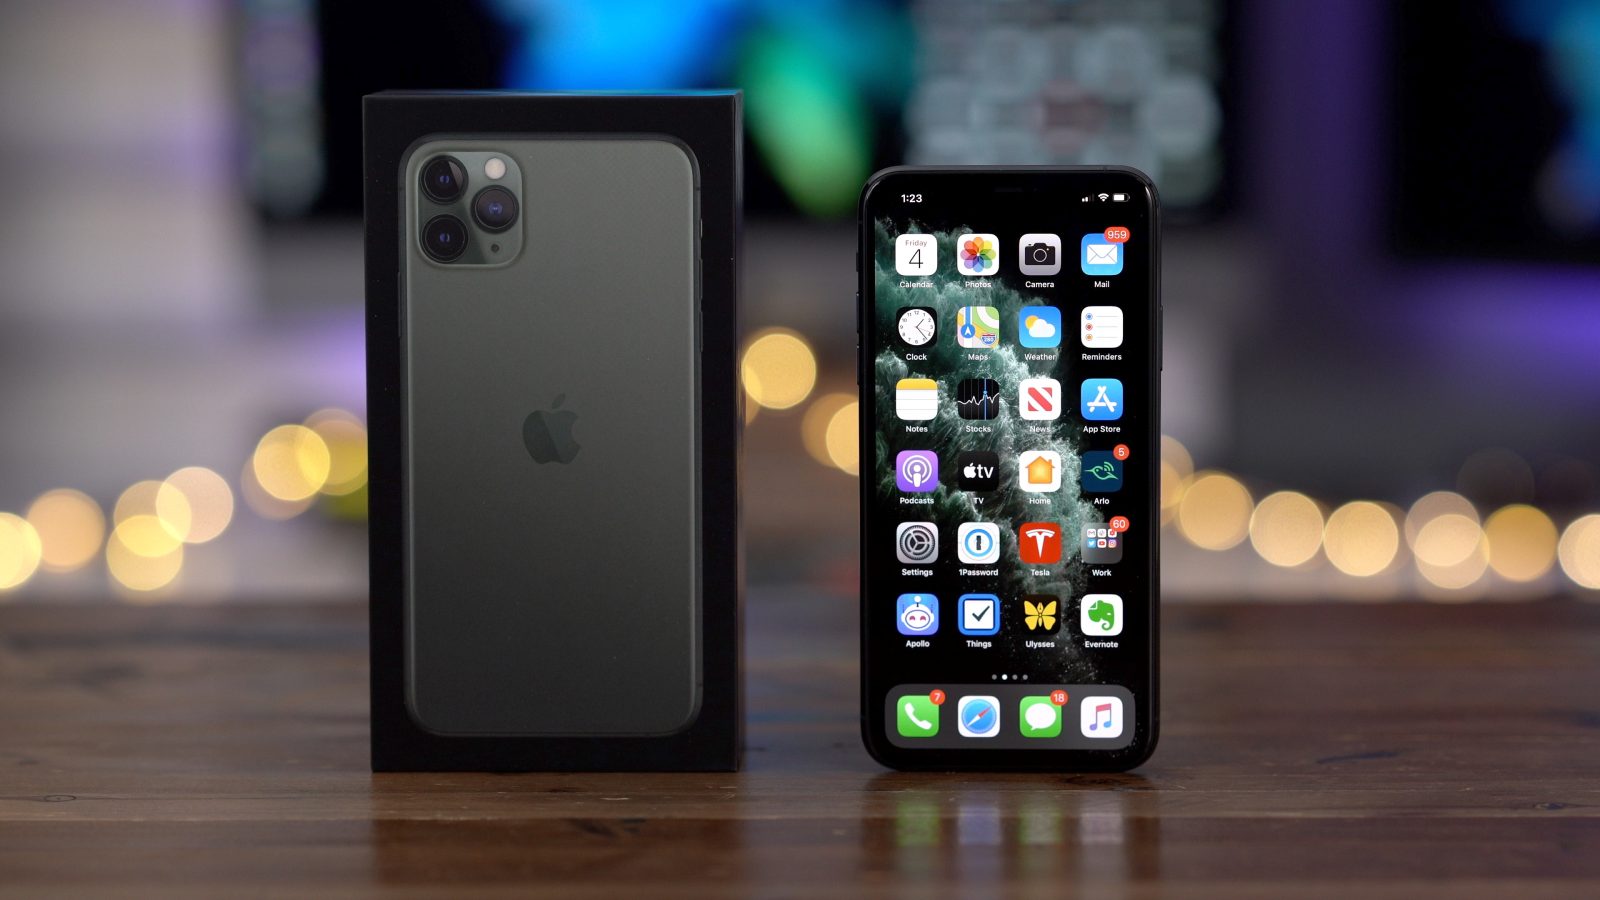 9to5rewards Enter To Win Iphone 11 Pro Max From Totallee